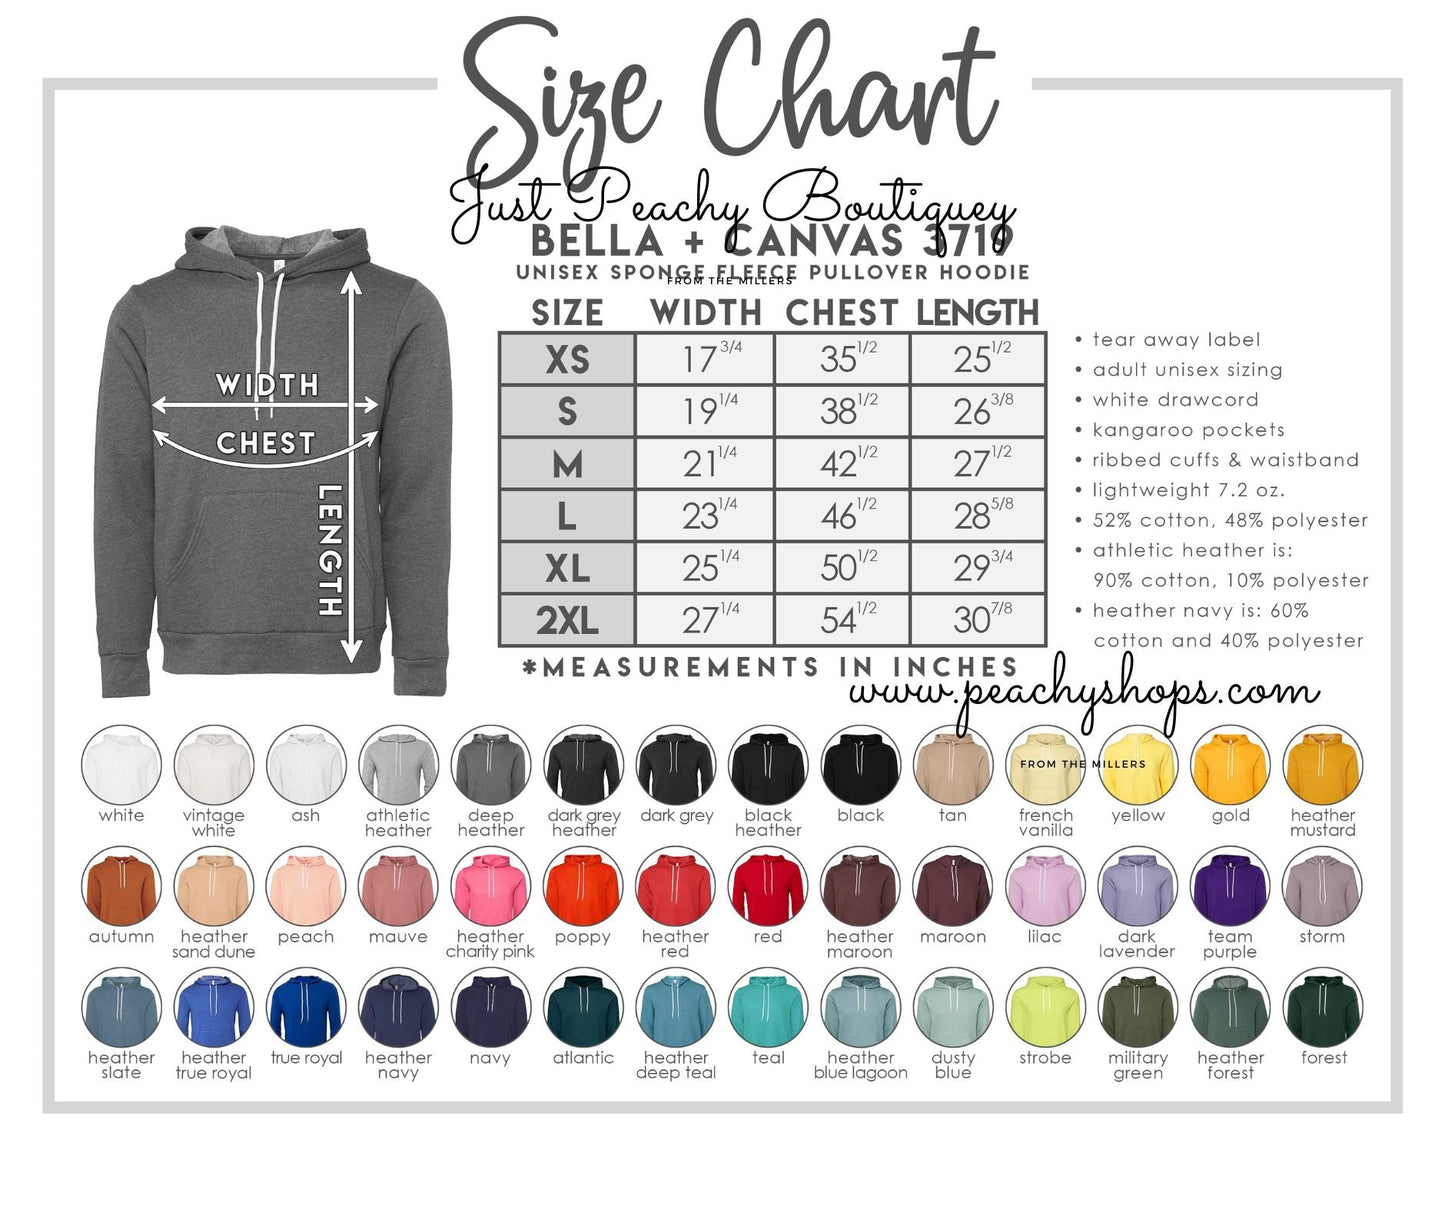 REMINDER EVEN THE WORST DAYS ARE ONLY 24 HOURS T-SHIRT OR PICK FROM 200 COLOR & STYLE OPTIONS! - TAT 4-7 DAYS